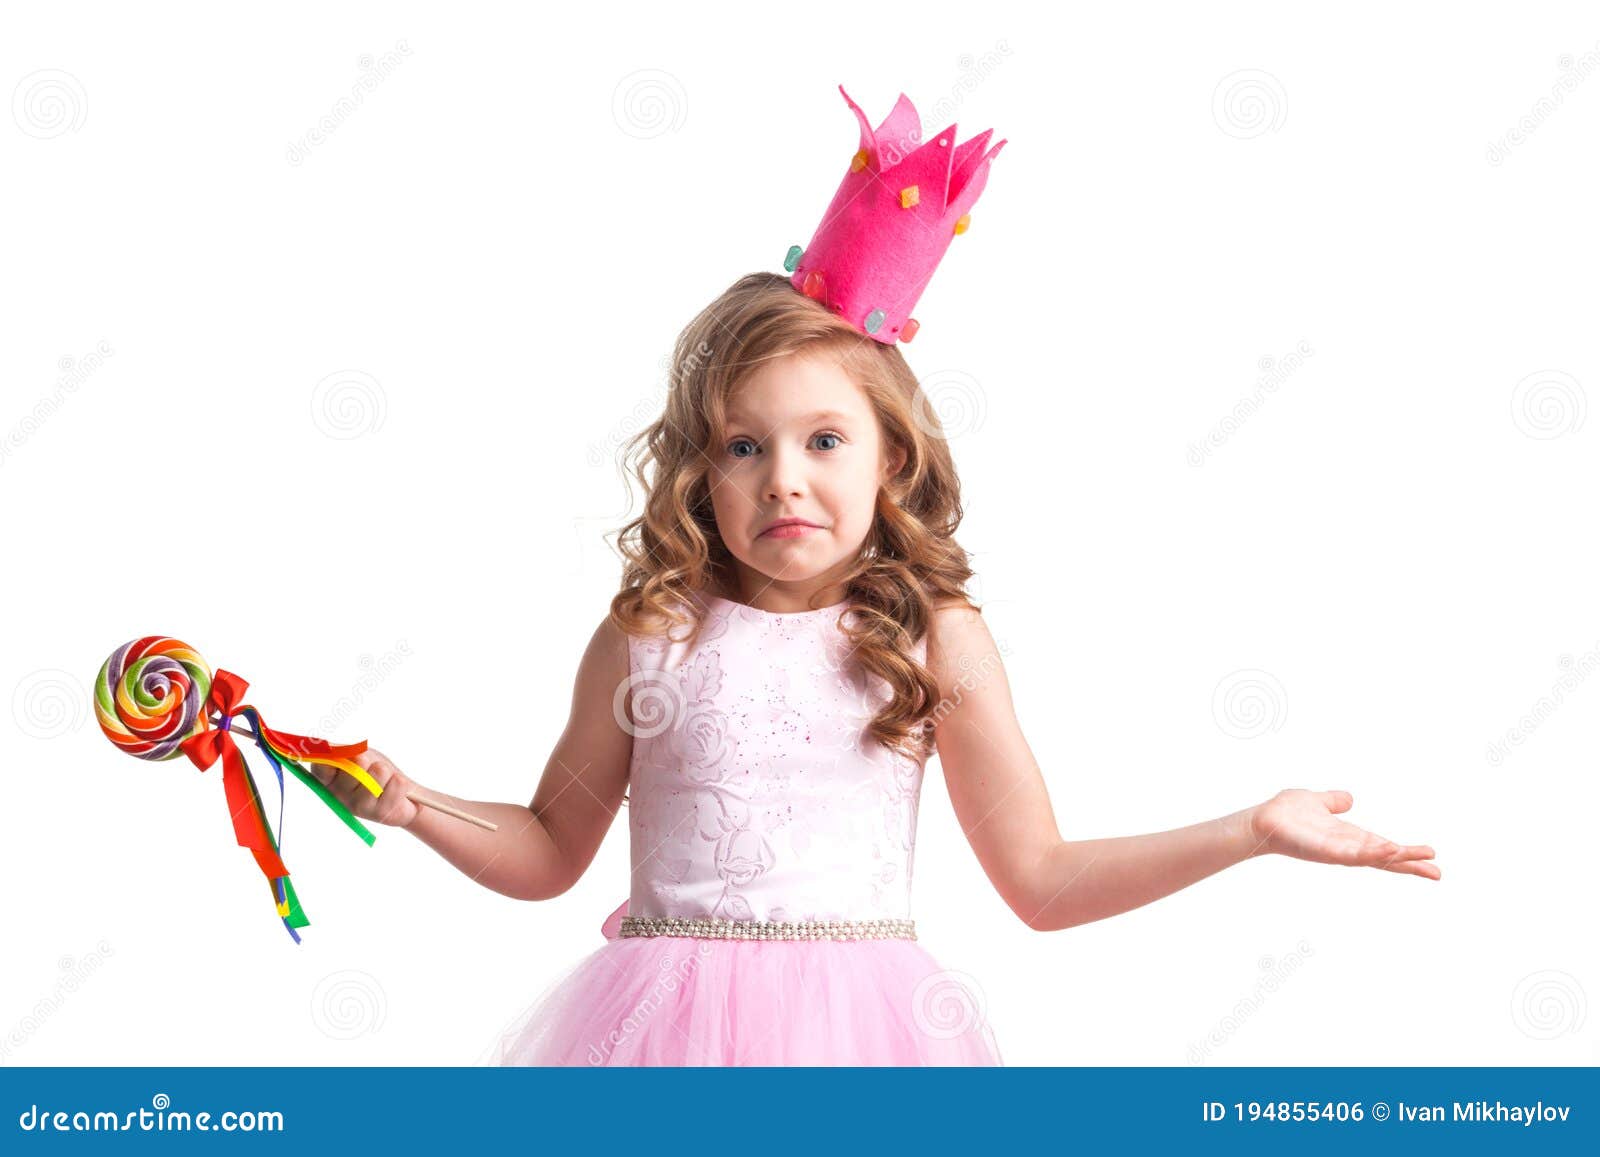 Candy Princess Girl in with Lollipop Stock Photo - Image of beautiful ...